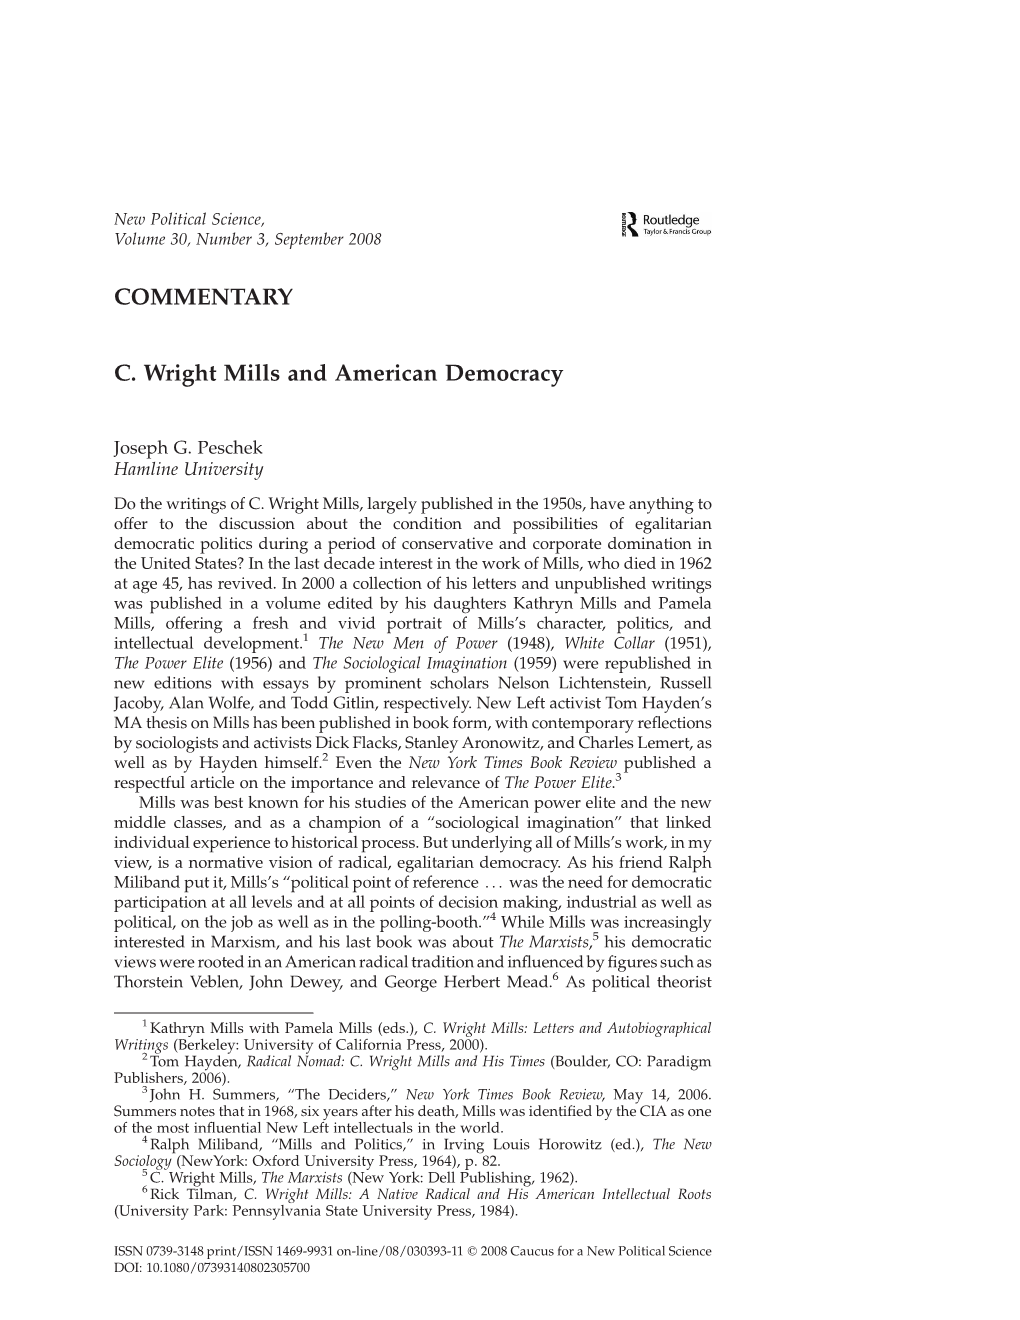 COMMENTARY C. Wright Mills and American Democracy